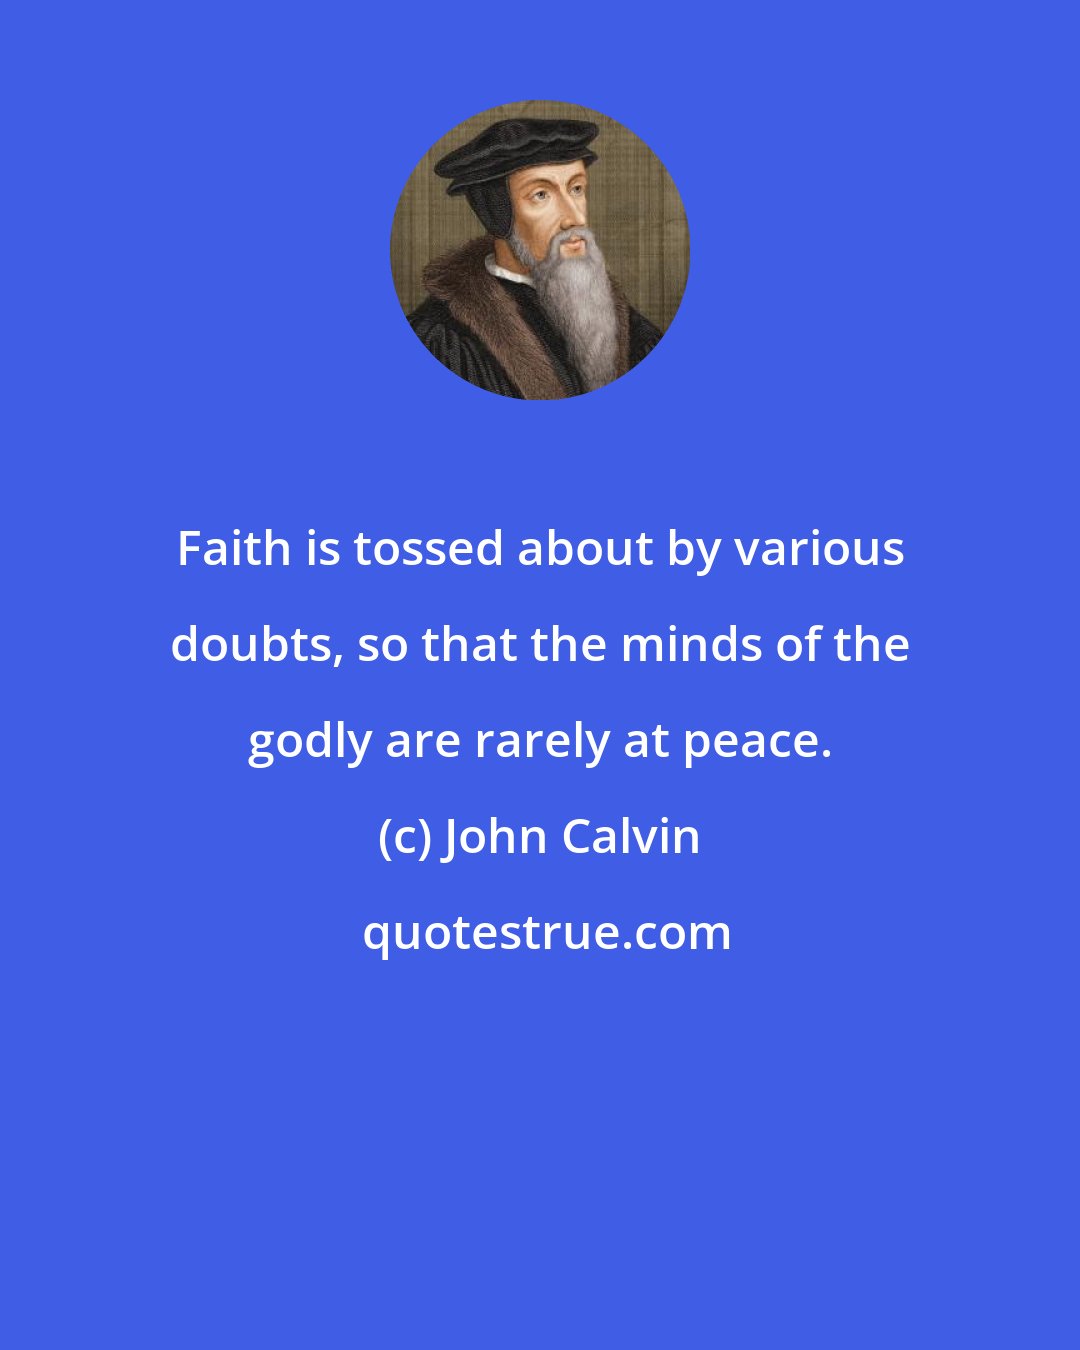 John Calvin: Faith is tossed about by various doubts, so that the minds of the godly are rarely at peace.